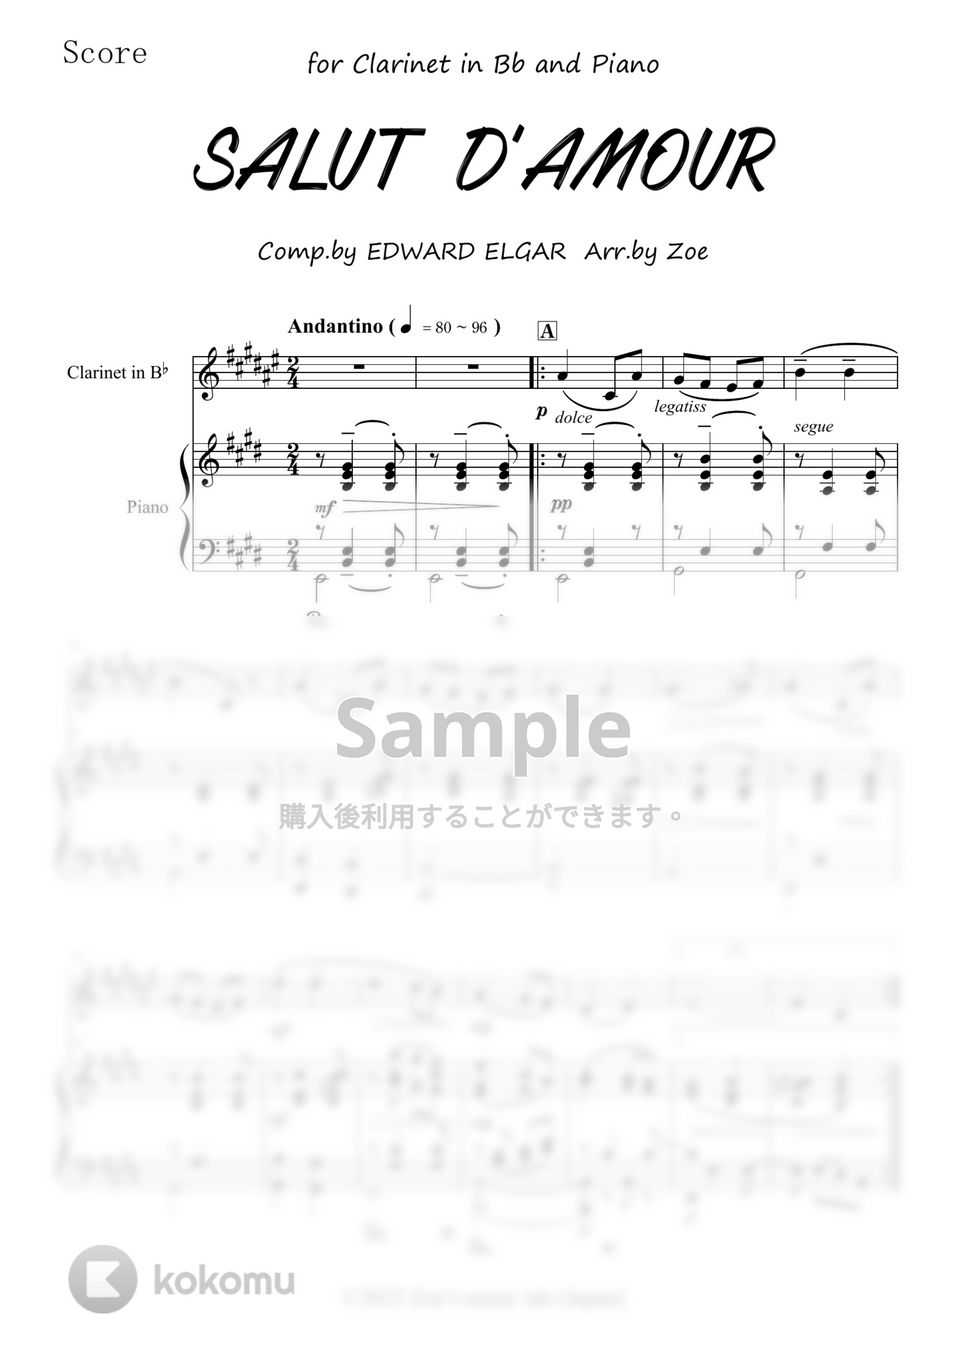 EDWARD ELGAR - 愛の挨拶 / SALUT D'AMOUR for Clarinet and Piano (原調版) ※Bb管/A管/Eb管 用譜面付き (クラリネット/ピアノ/エルガー/) by Zoe